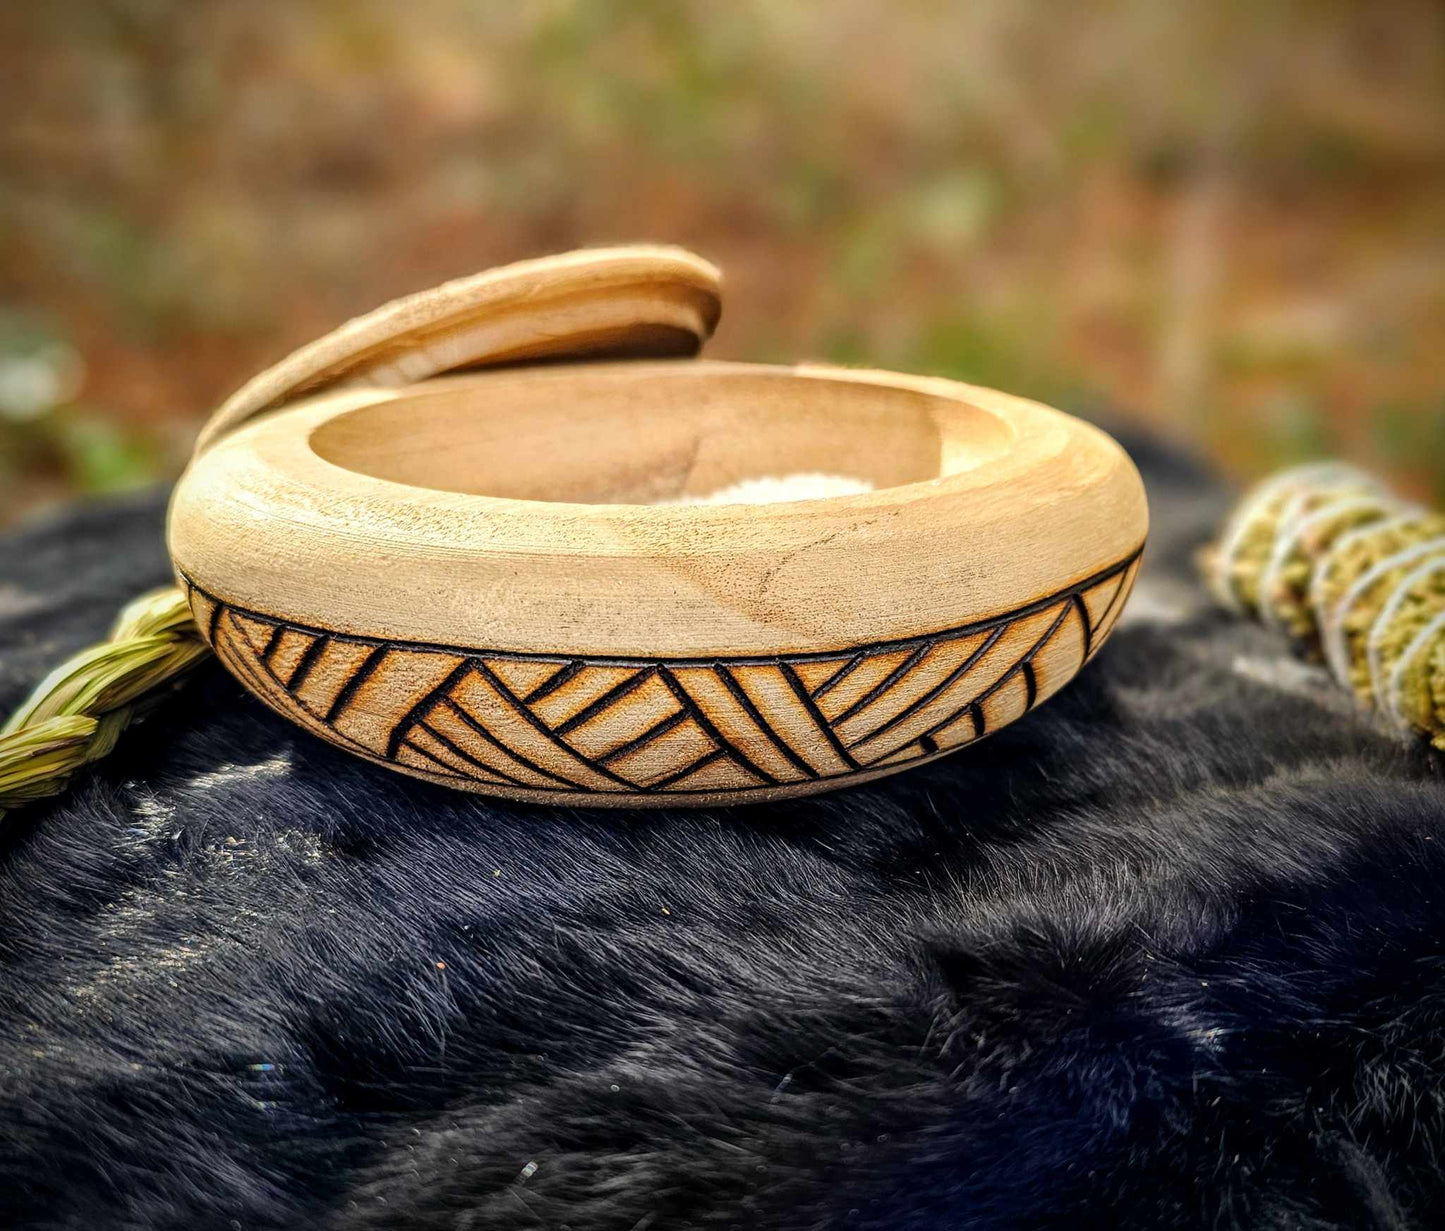 Hand Burned Woven Band Bowl With Lid